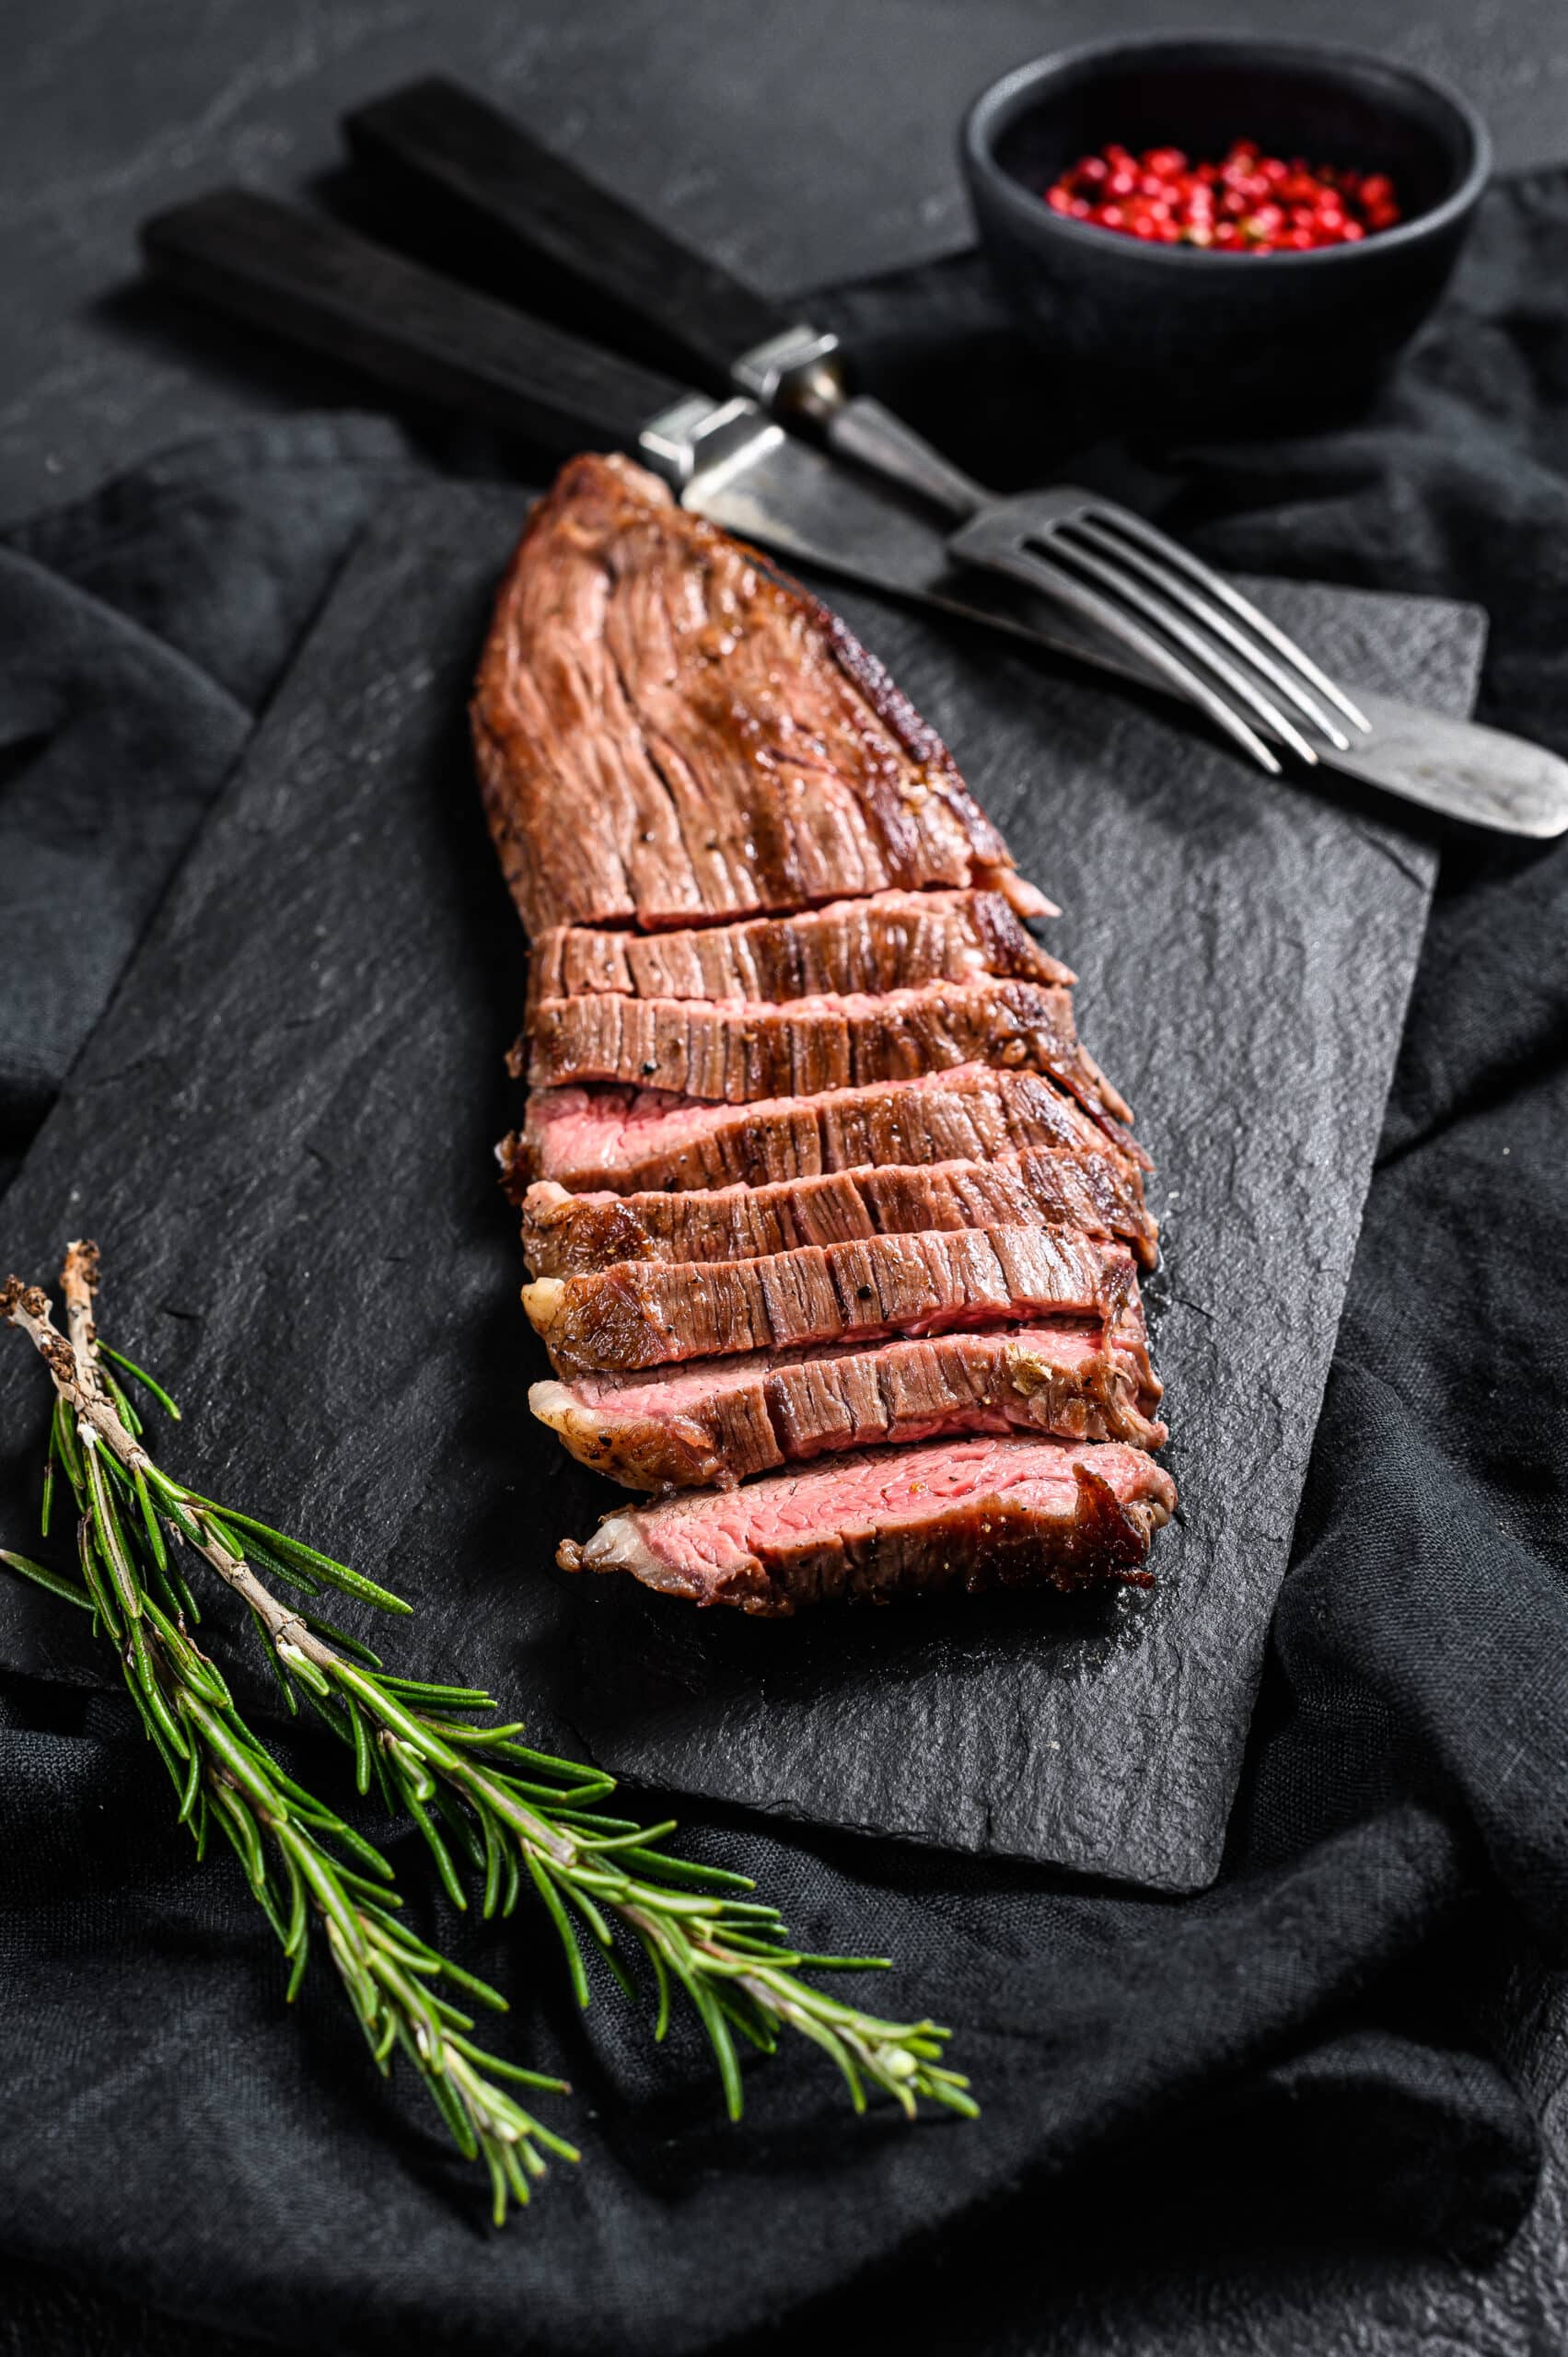 How To Cooktop Around London Broil